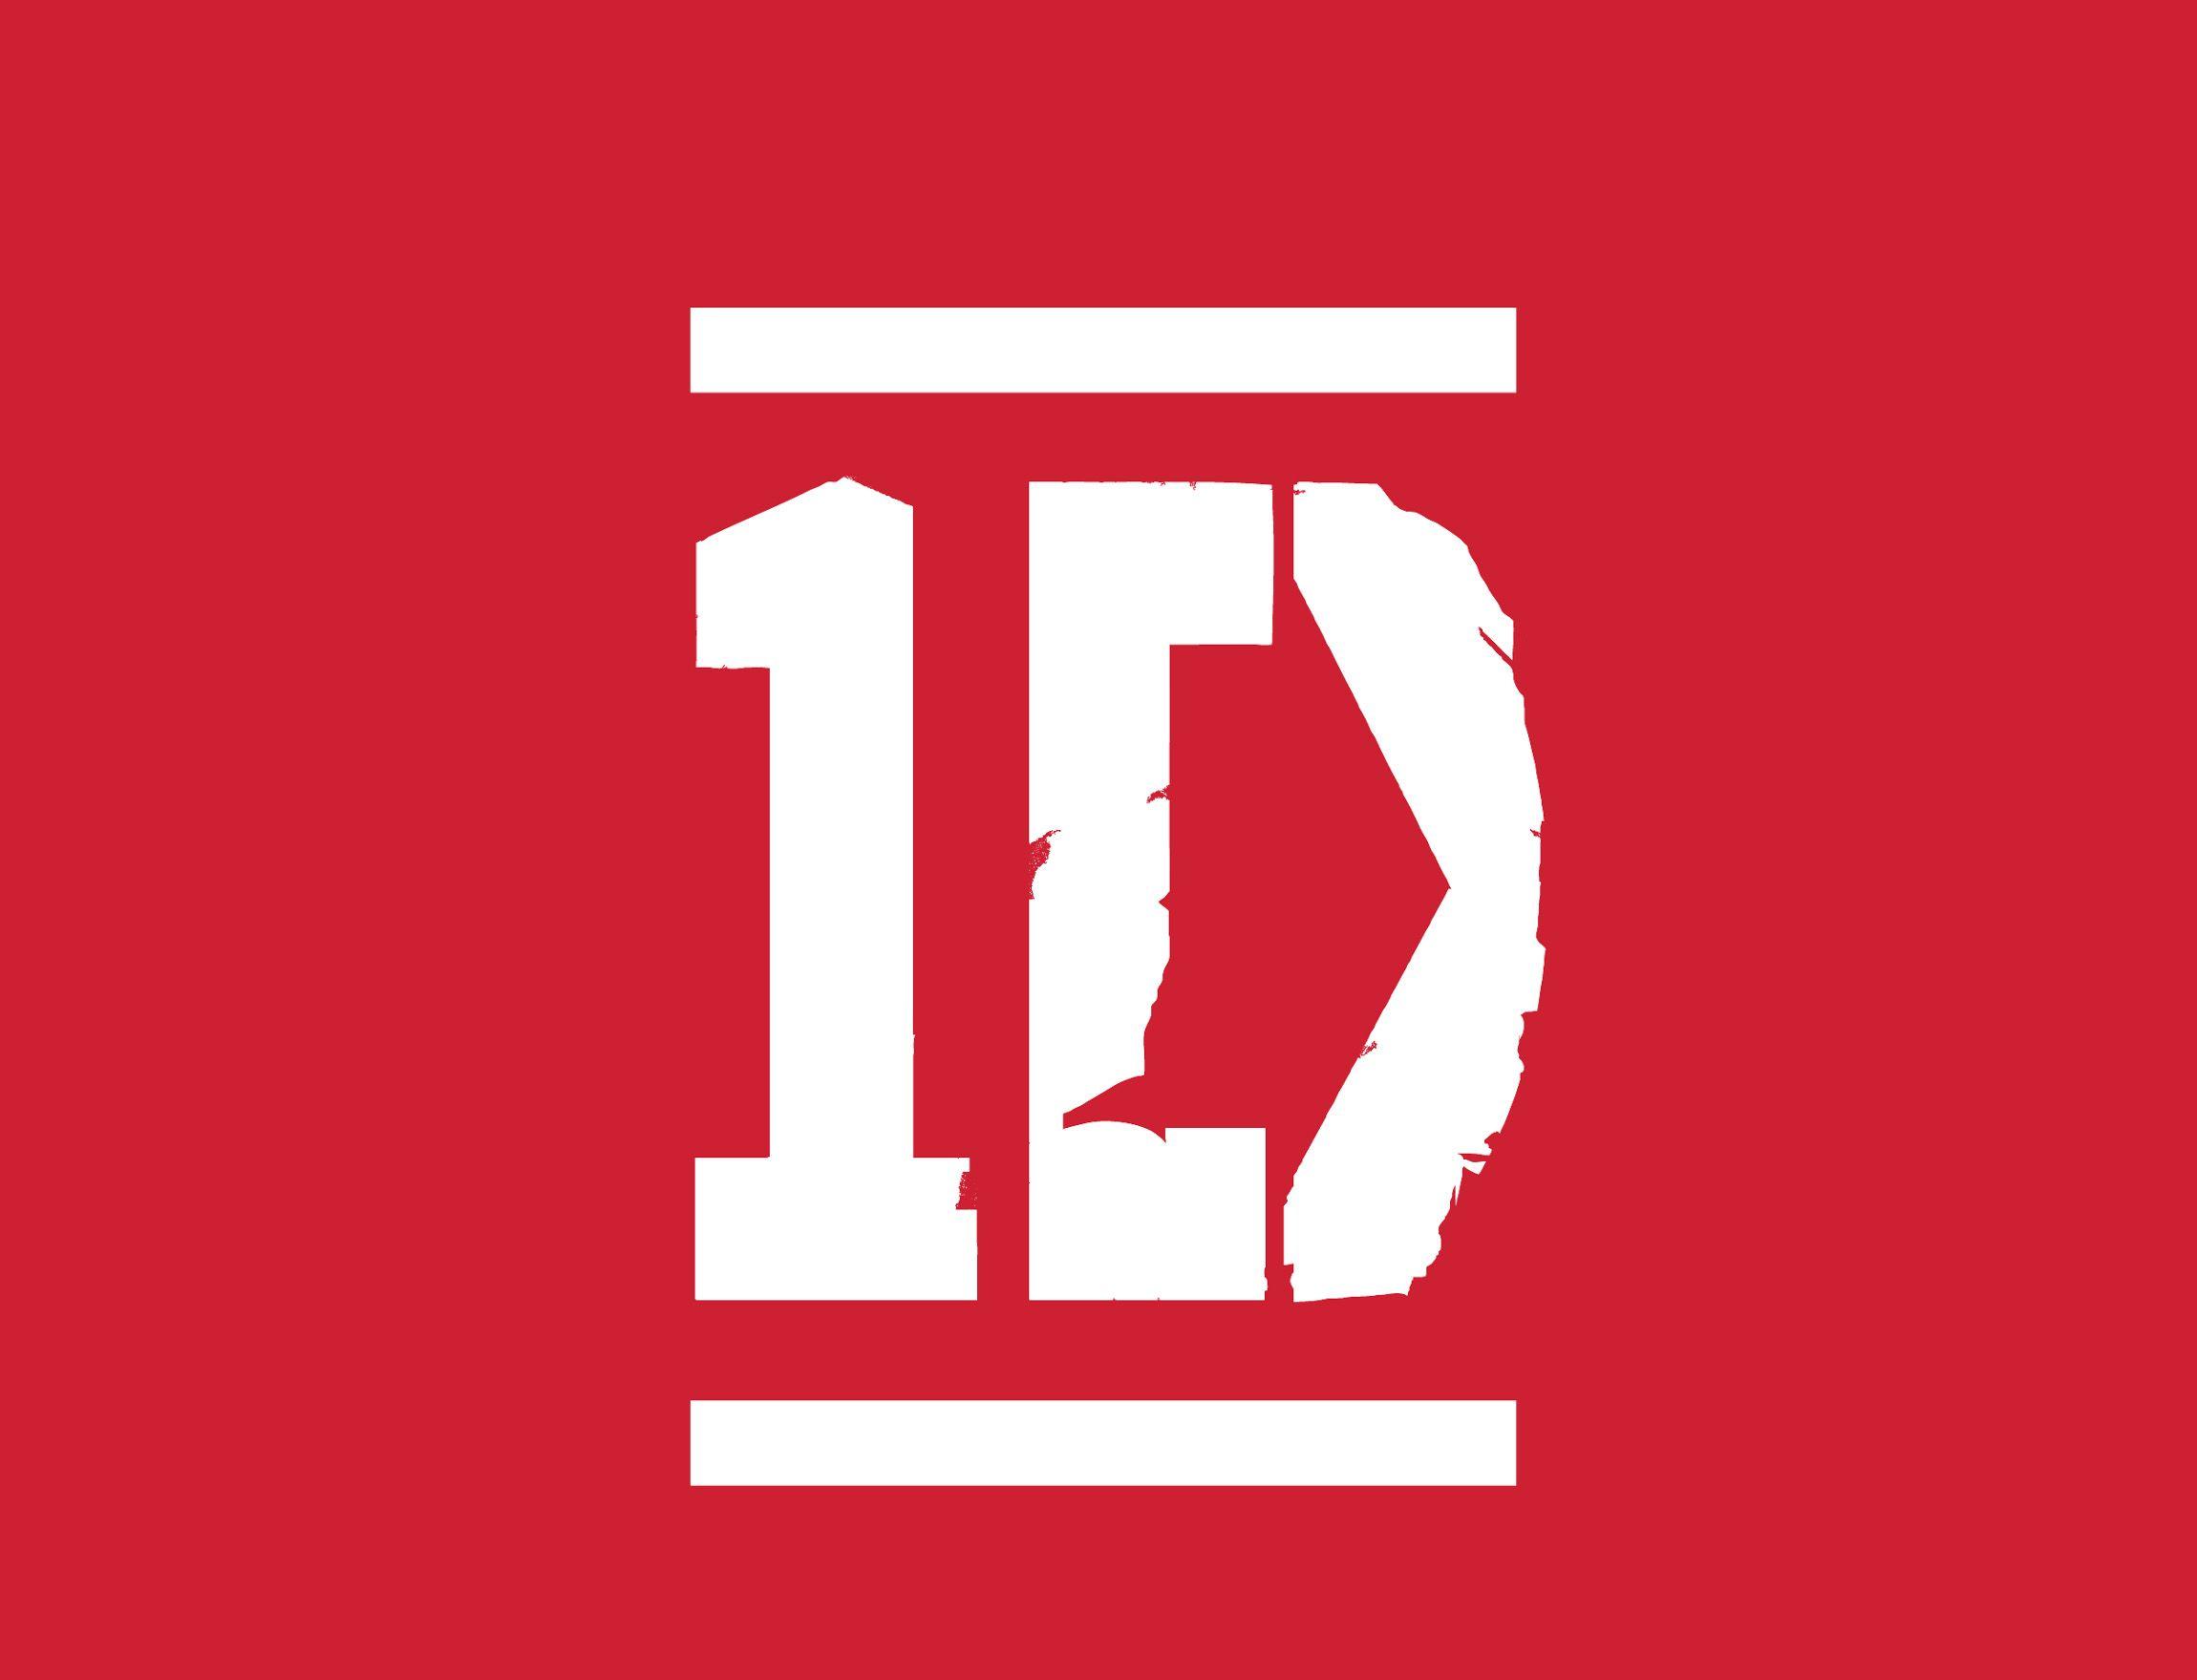 One Direction Logo - One Direction Logo, One Direction Symbol, Meaning, History and Evolution